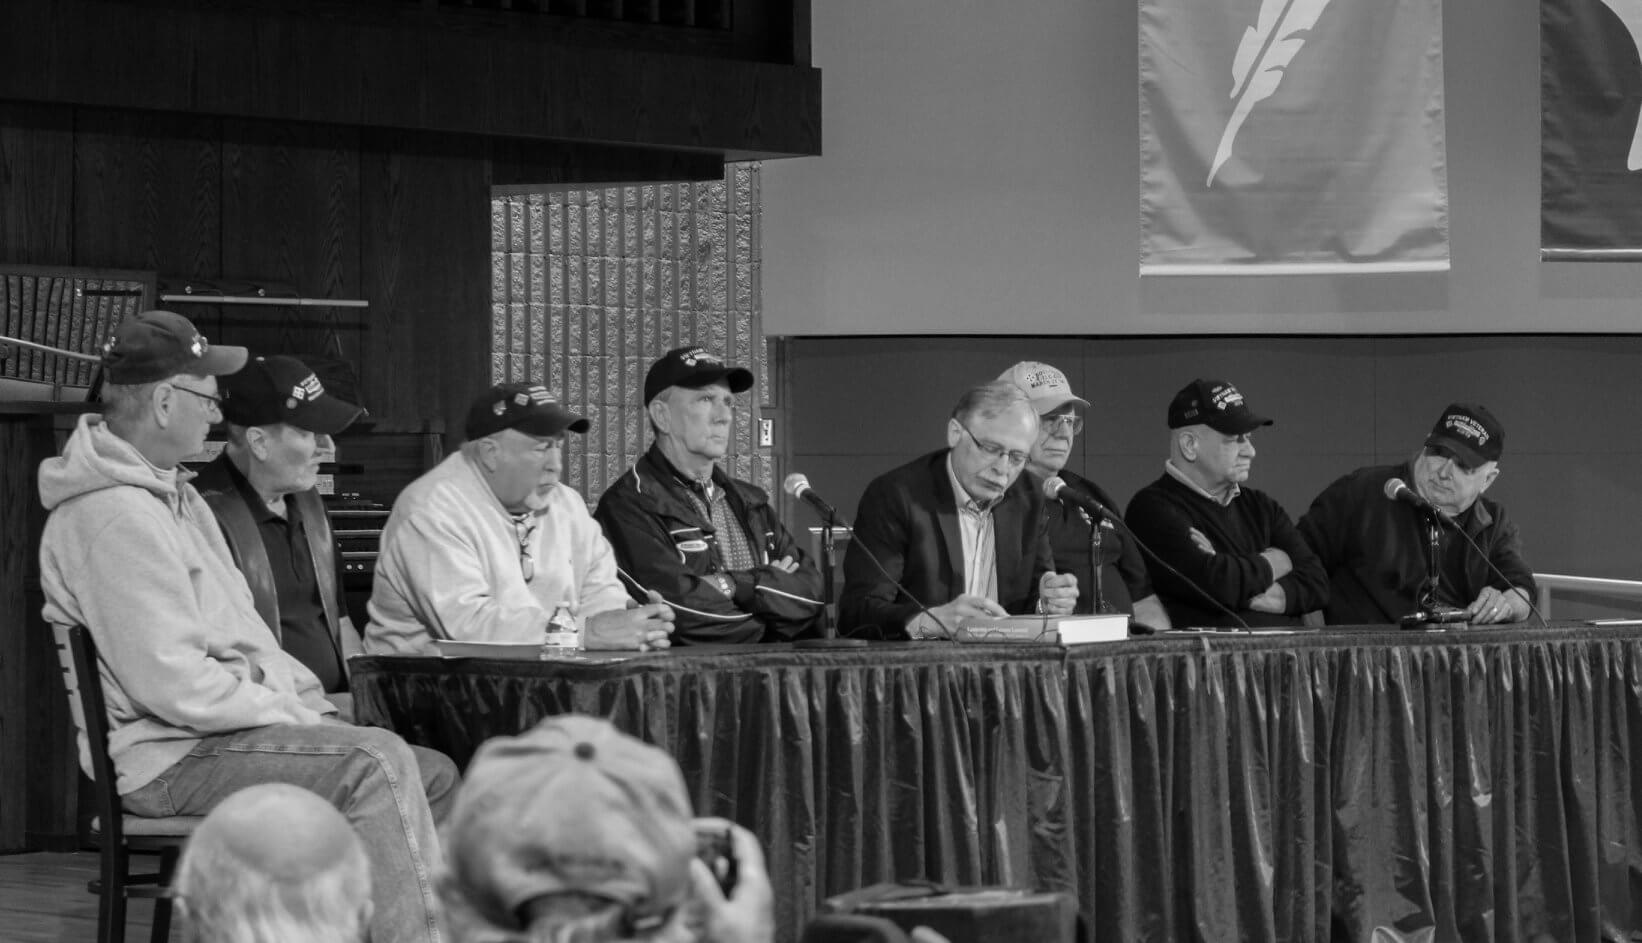 Panel of veterans at an event